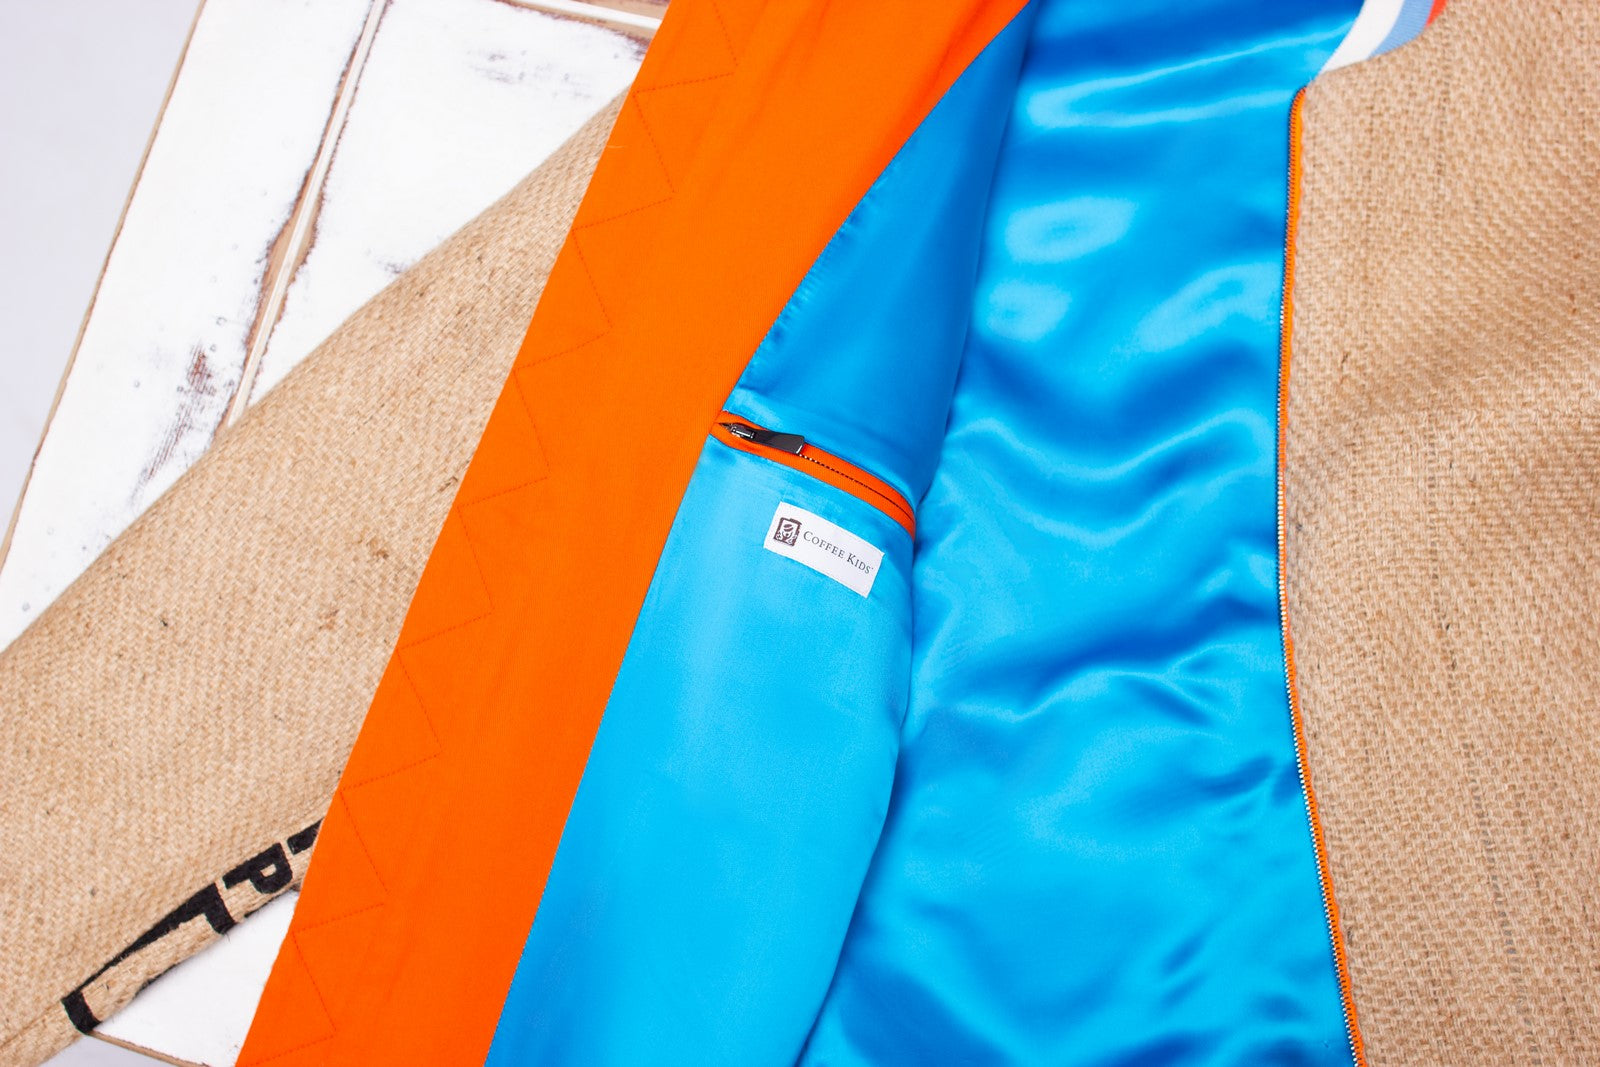 Colourful inner workings in sky blue and sunny orange of an exquisite eco-friendly jacket from coffee sacks